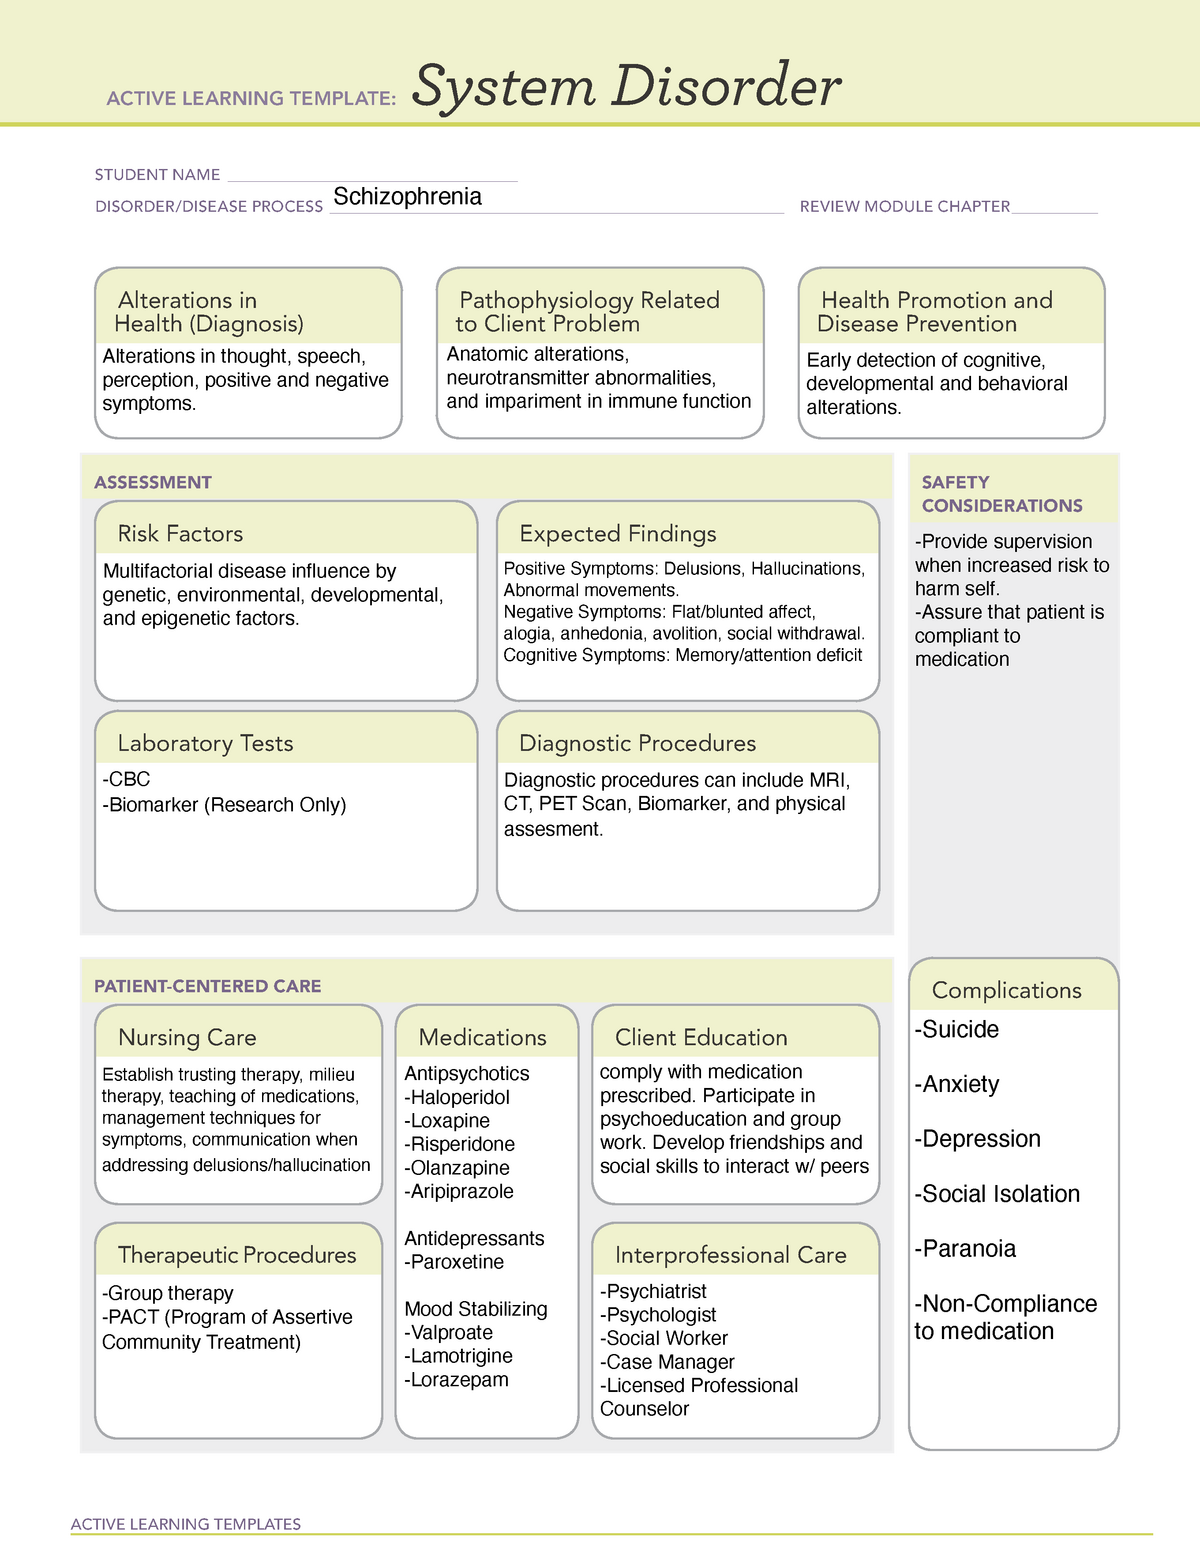 schizophrenia-disorder-system-sheet-active-learning-templates-system-disorder-student-name